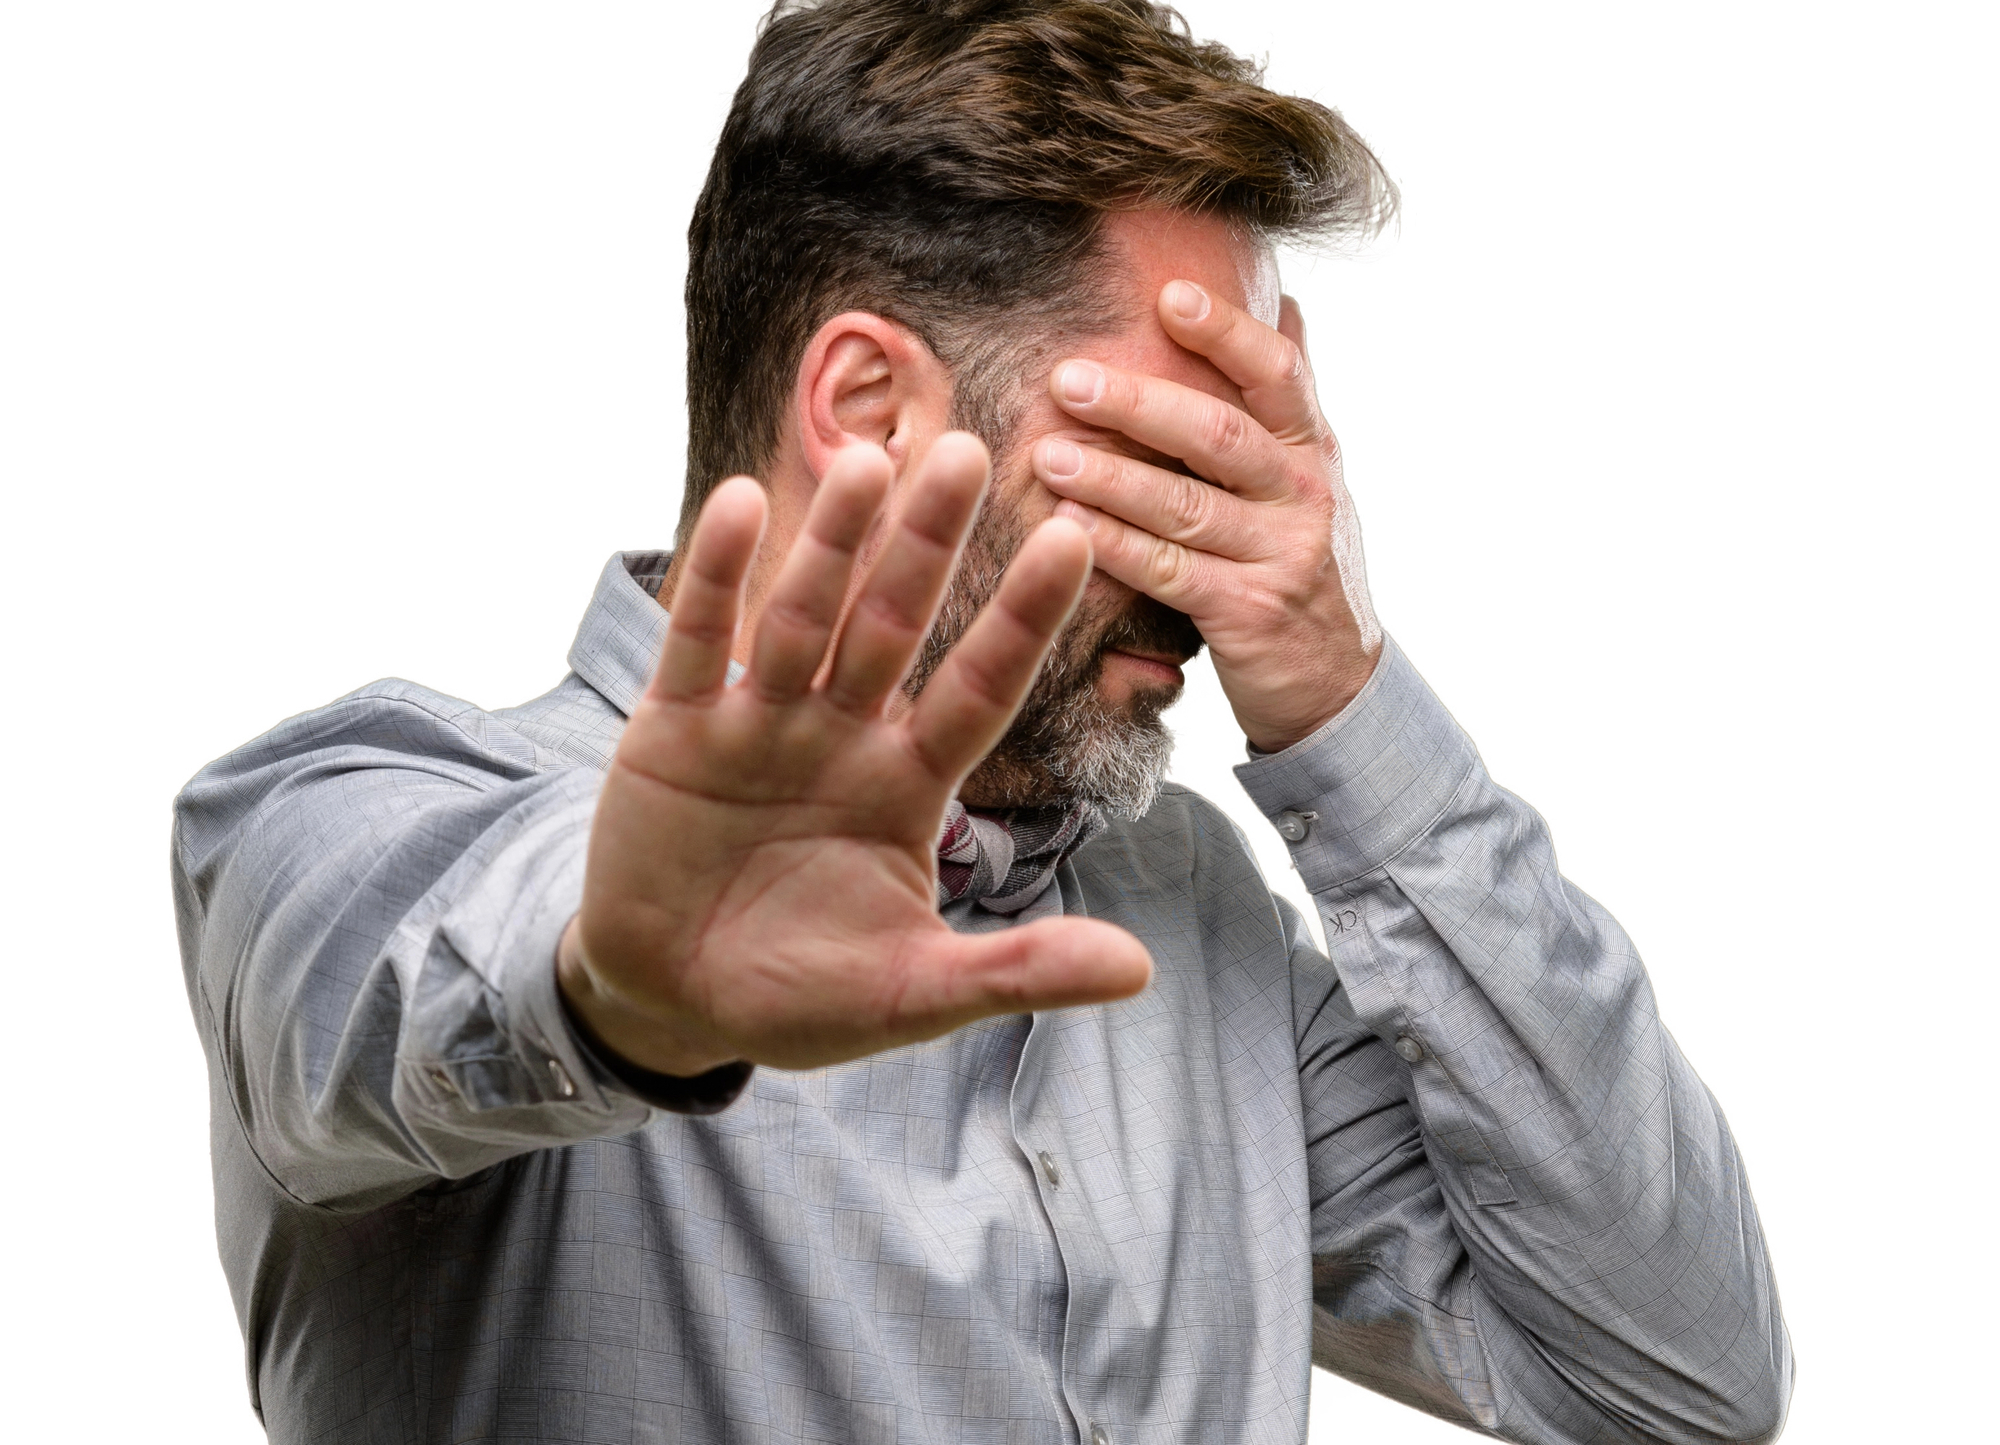 Businessman covering his face in frustration and holding his hand out to stop another person from talking